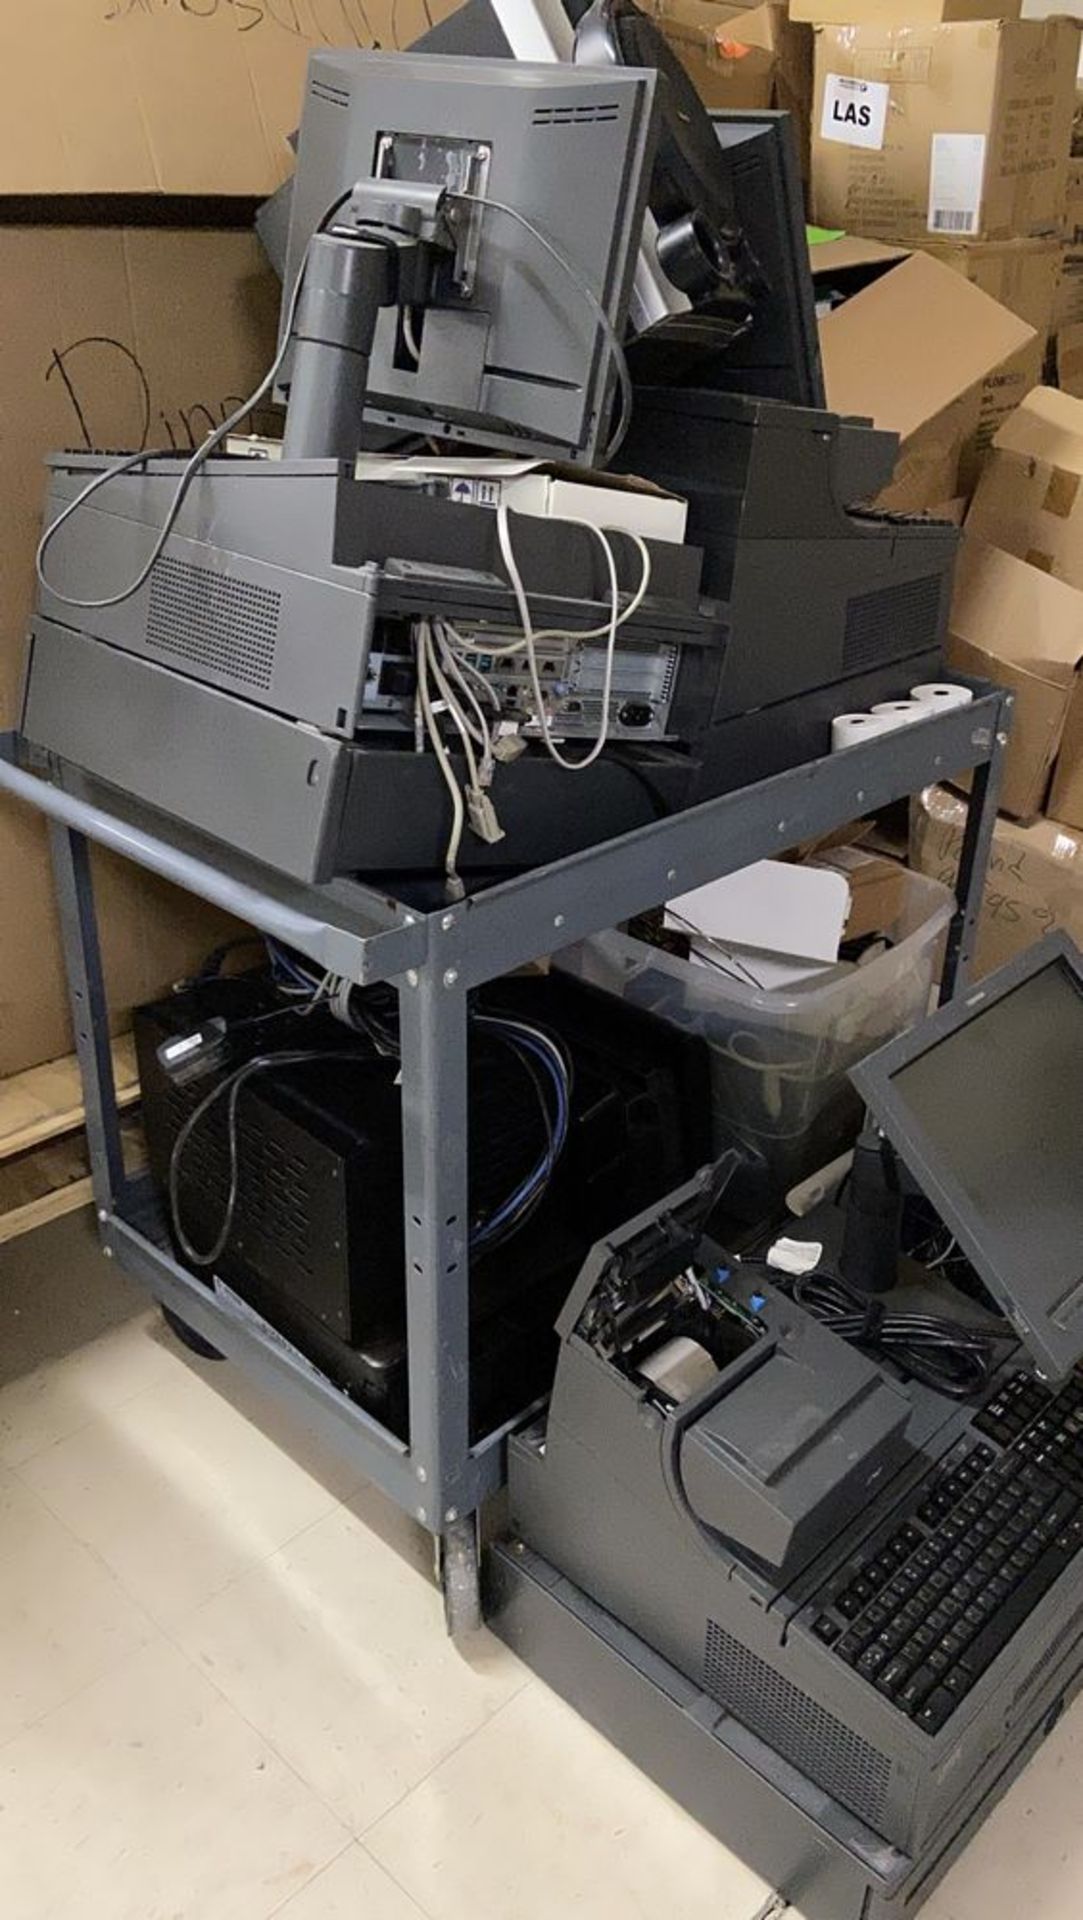 Pallet of Toshiba POS Cash Registers, Computer Towers and Cables etc - Image 2 of 6